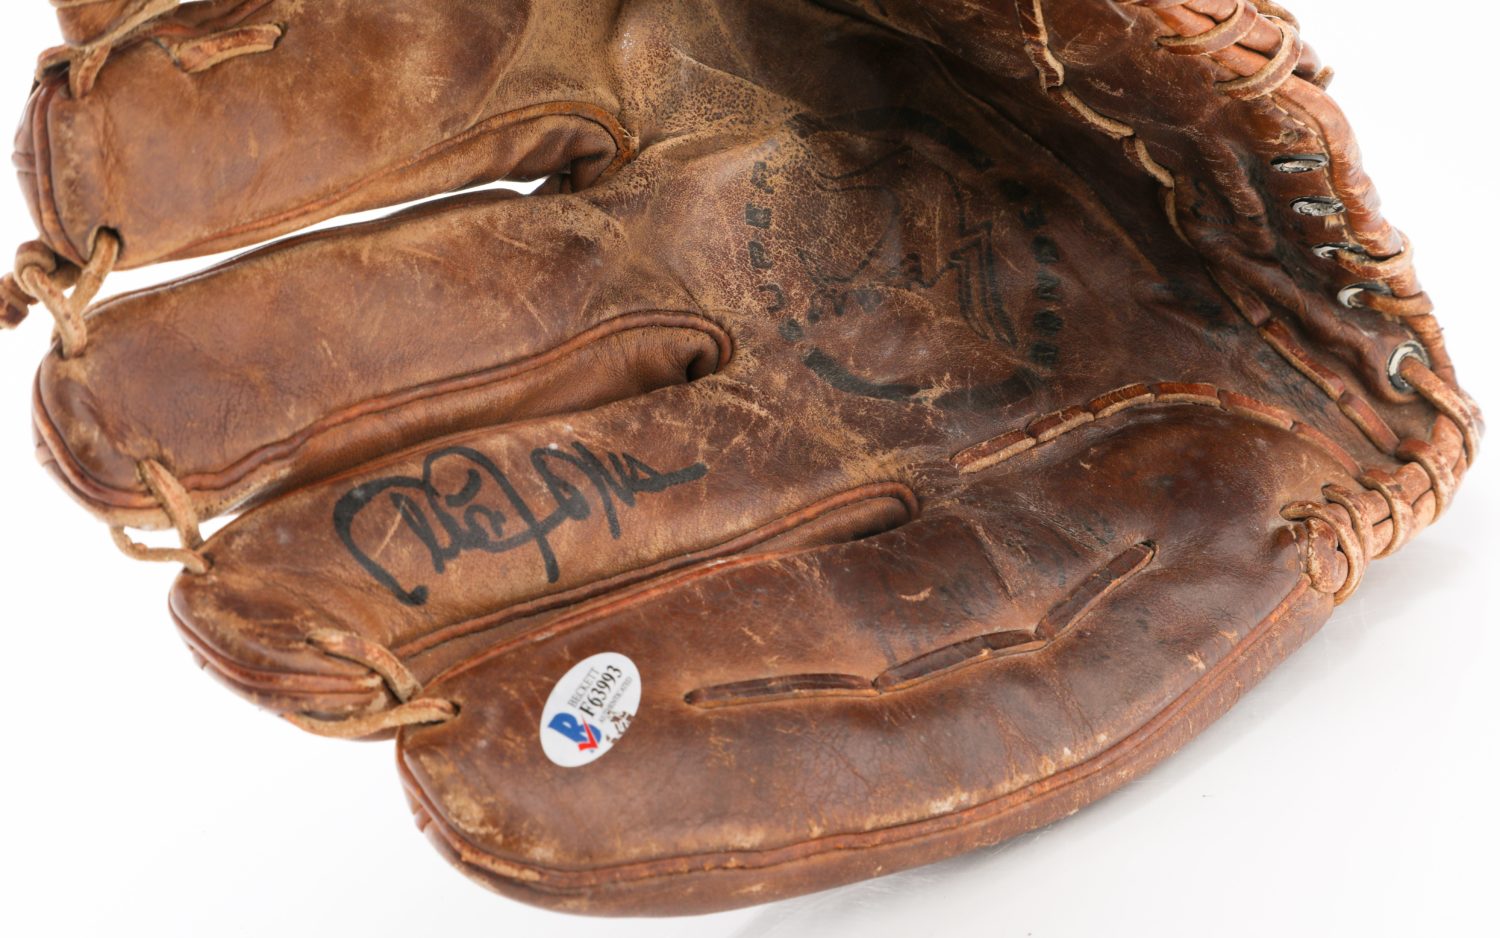 Cleon Jones Autographed and Game-Used Glove